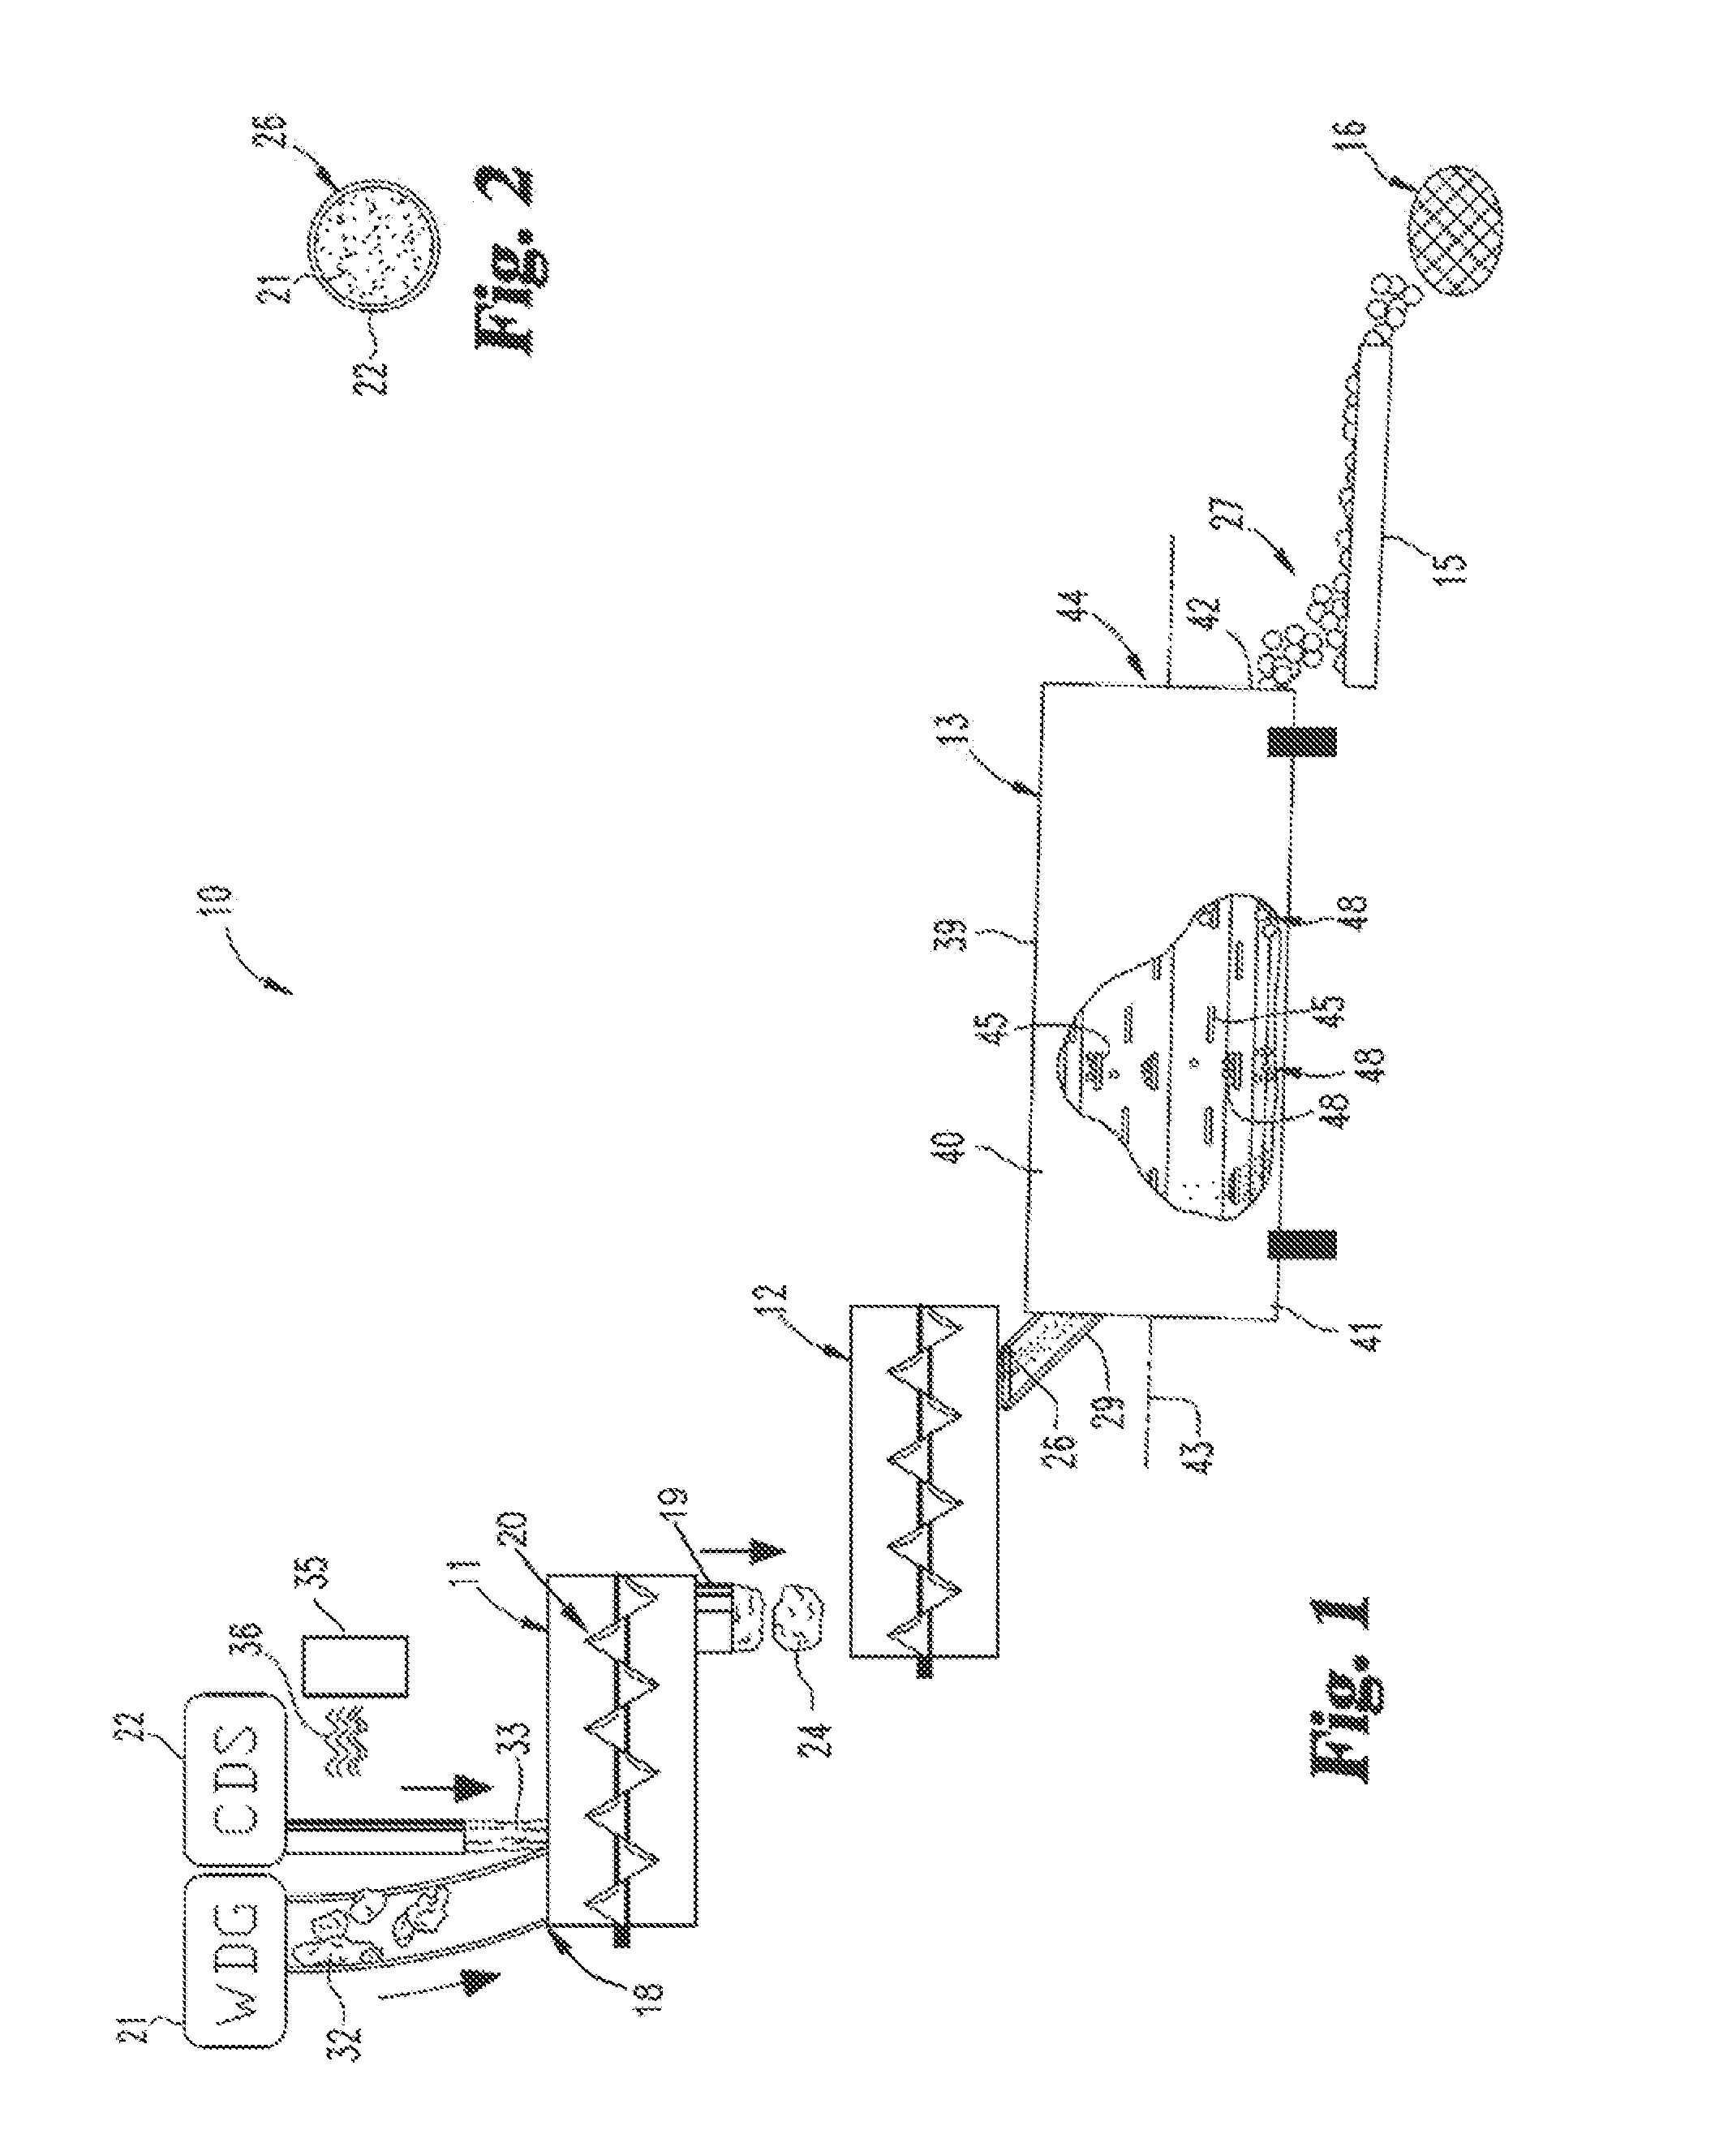 Apparatus and method for producing biobased carriers from byproducts of biomass processing